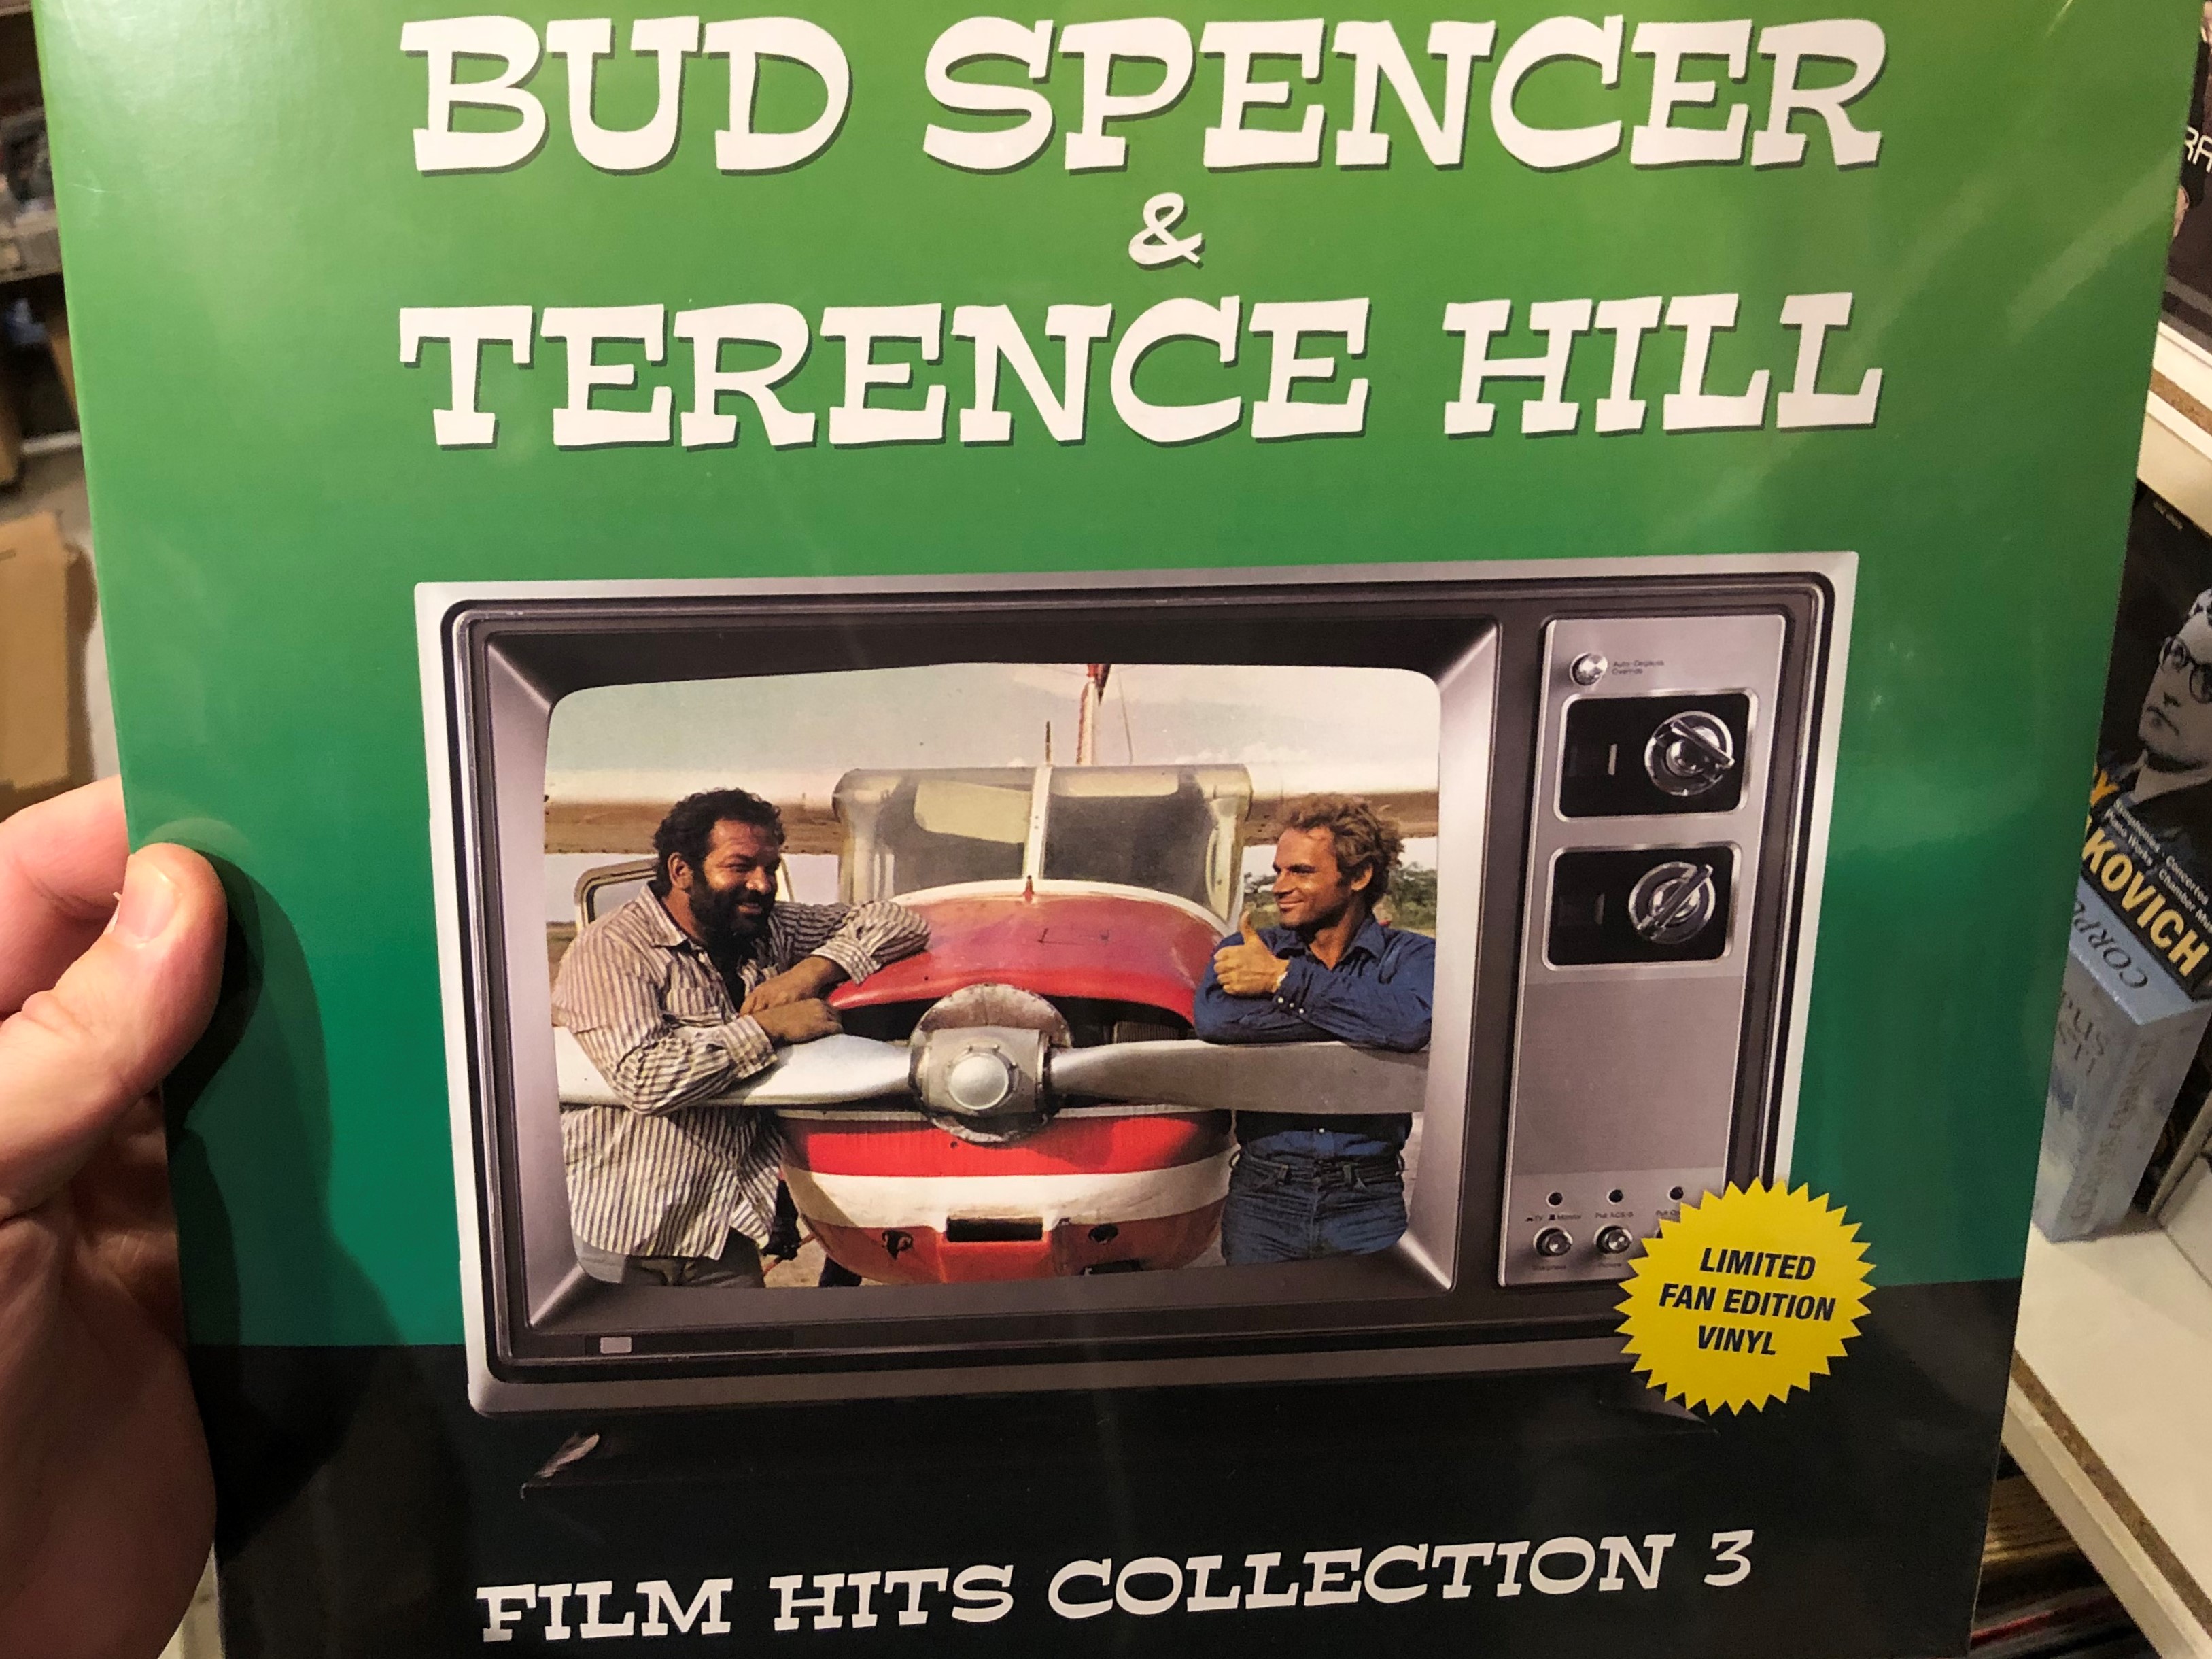 Bud Spencer & Terence Hill - Film Hits Collection 3: Limited Fan Edition  (Vinyl) LP / Hargent Media 2010 / Super snooper, Banana Joe, Bulldozer,  Shining Day, Angels and Beans - bibleinmylanguage